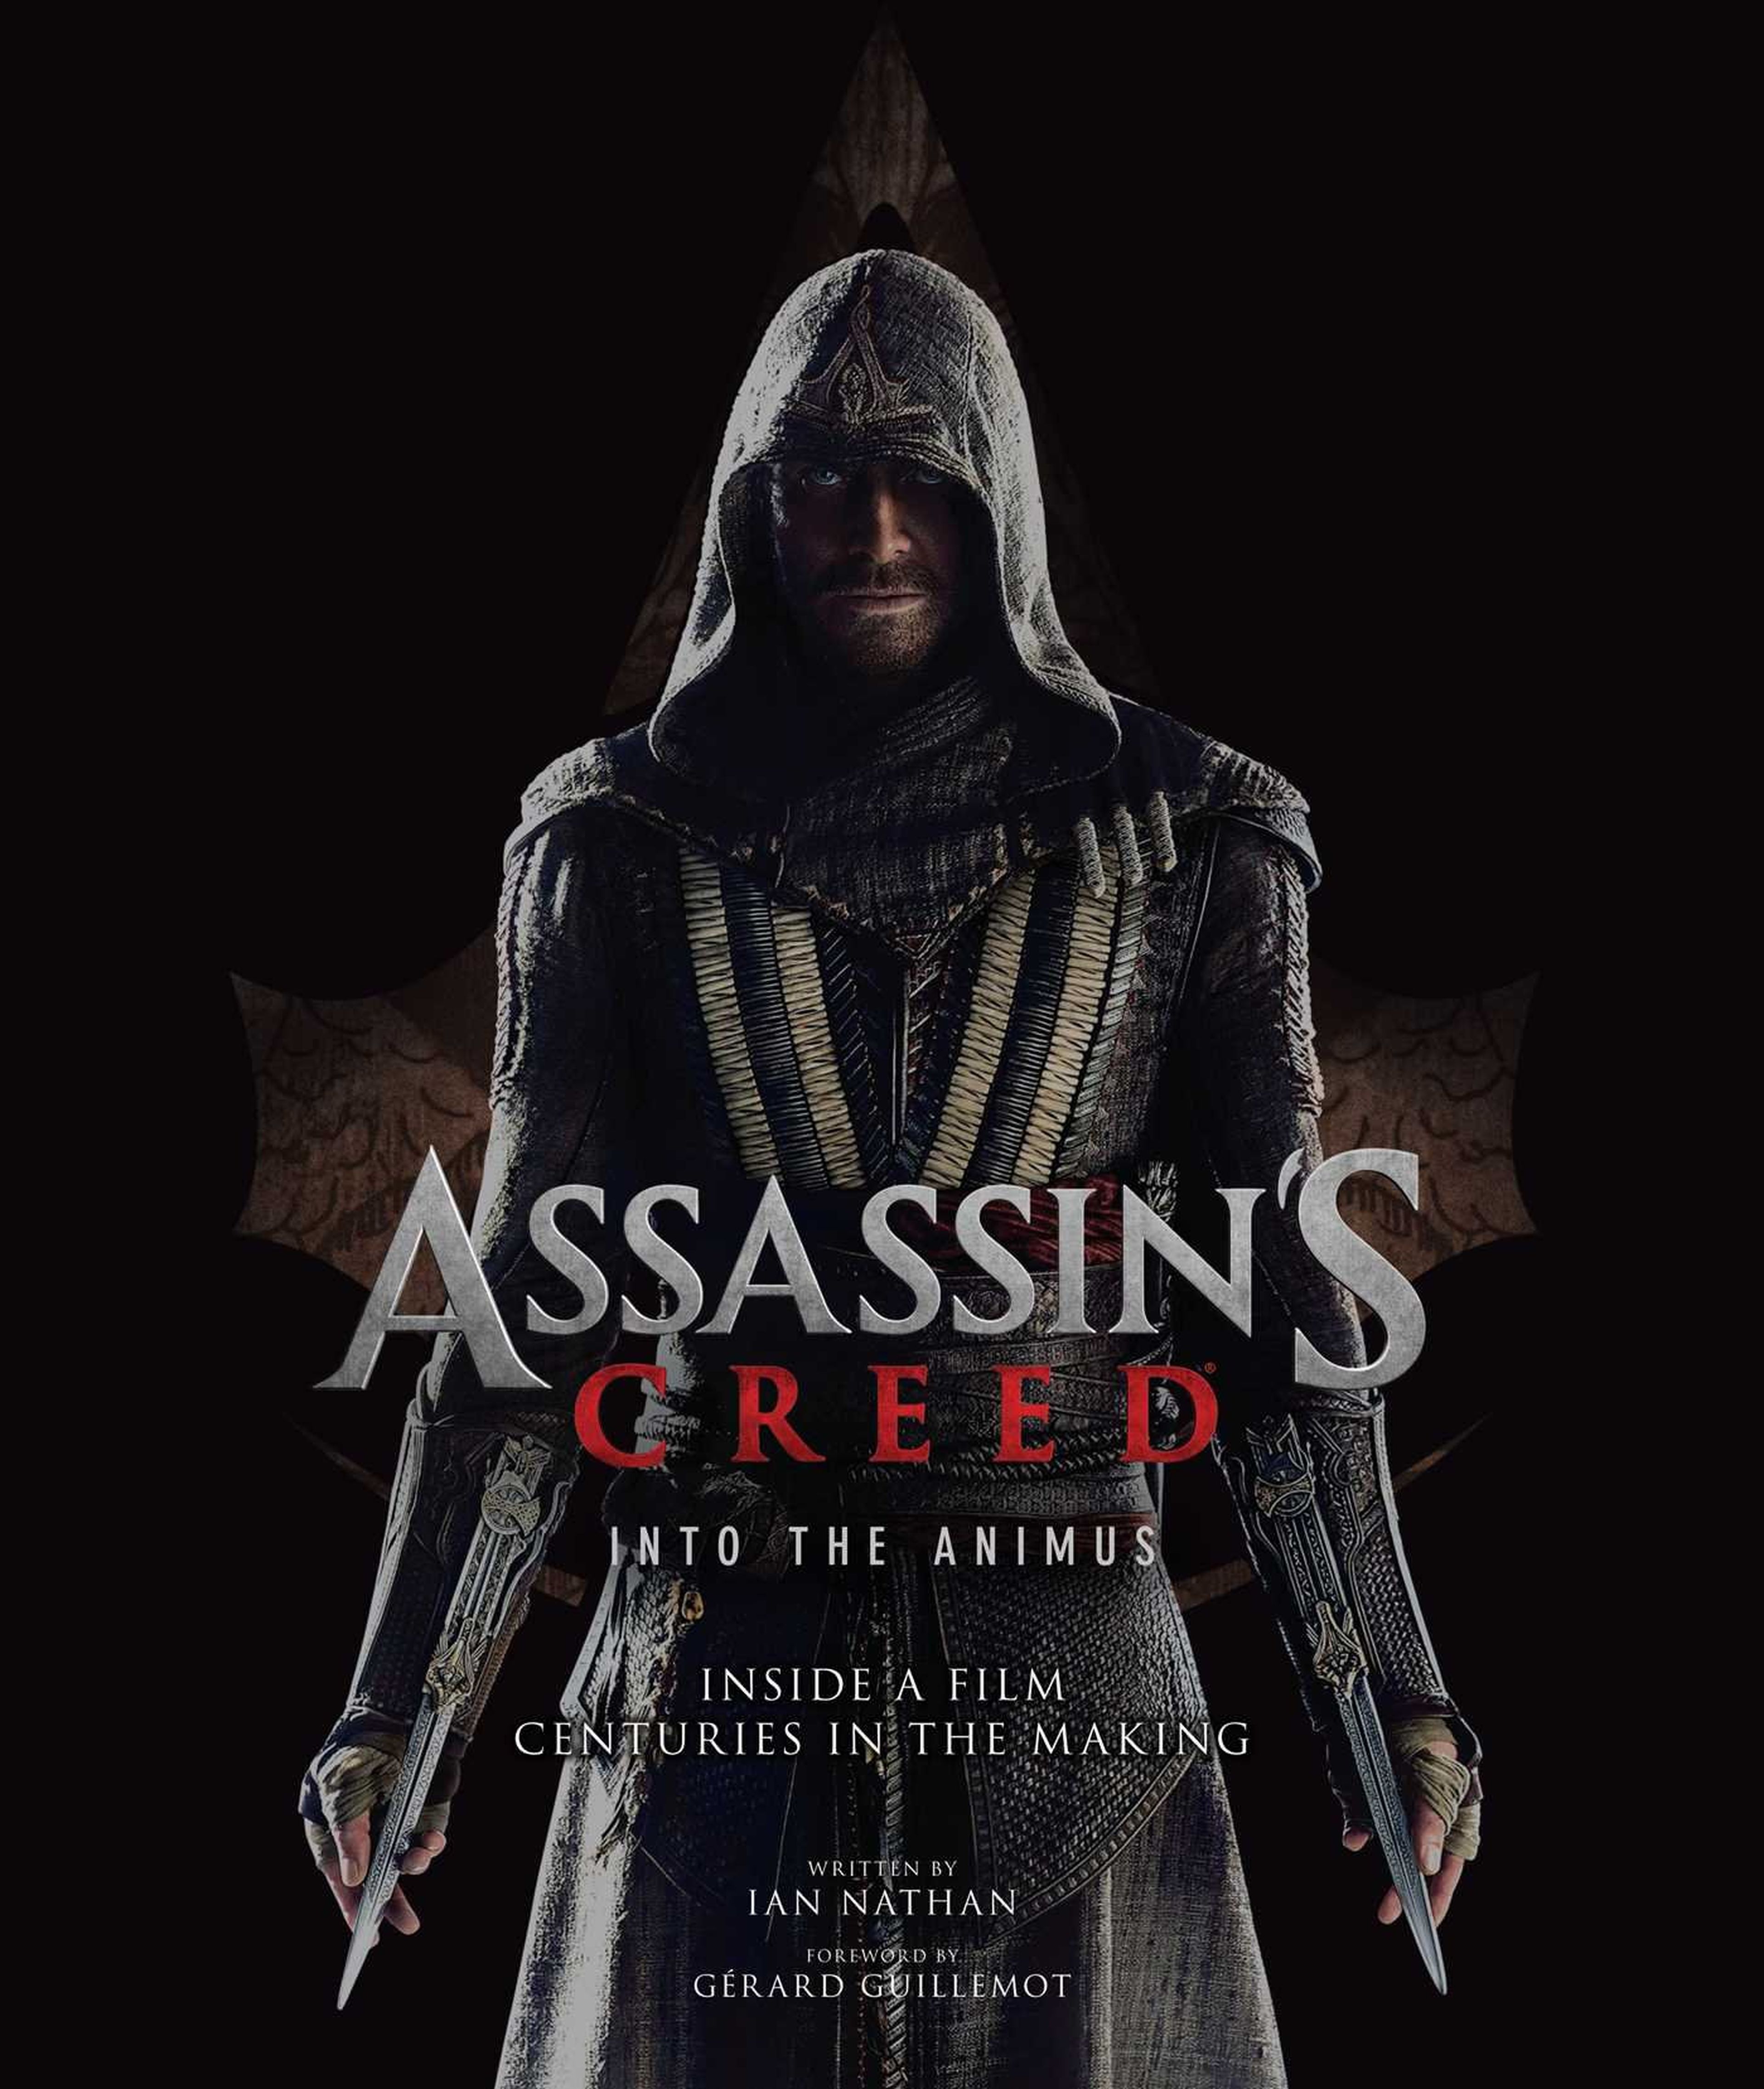 Assassin's Creed Libros